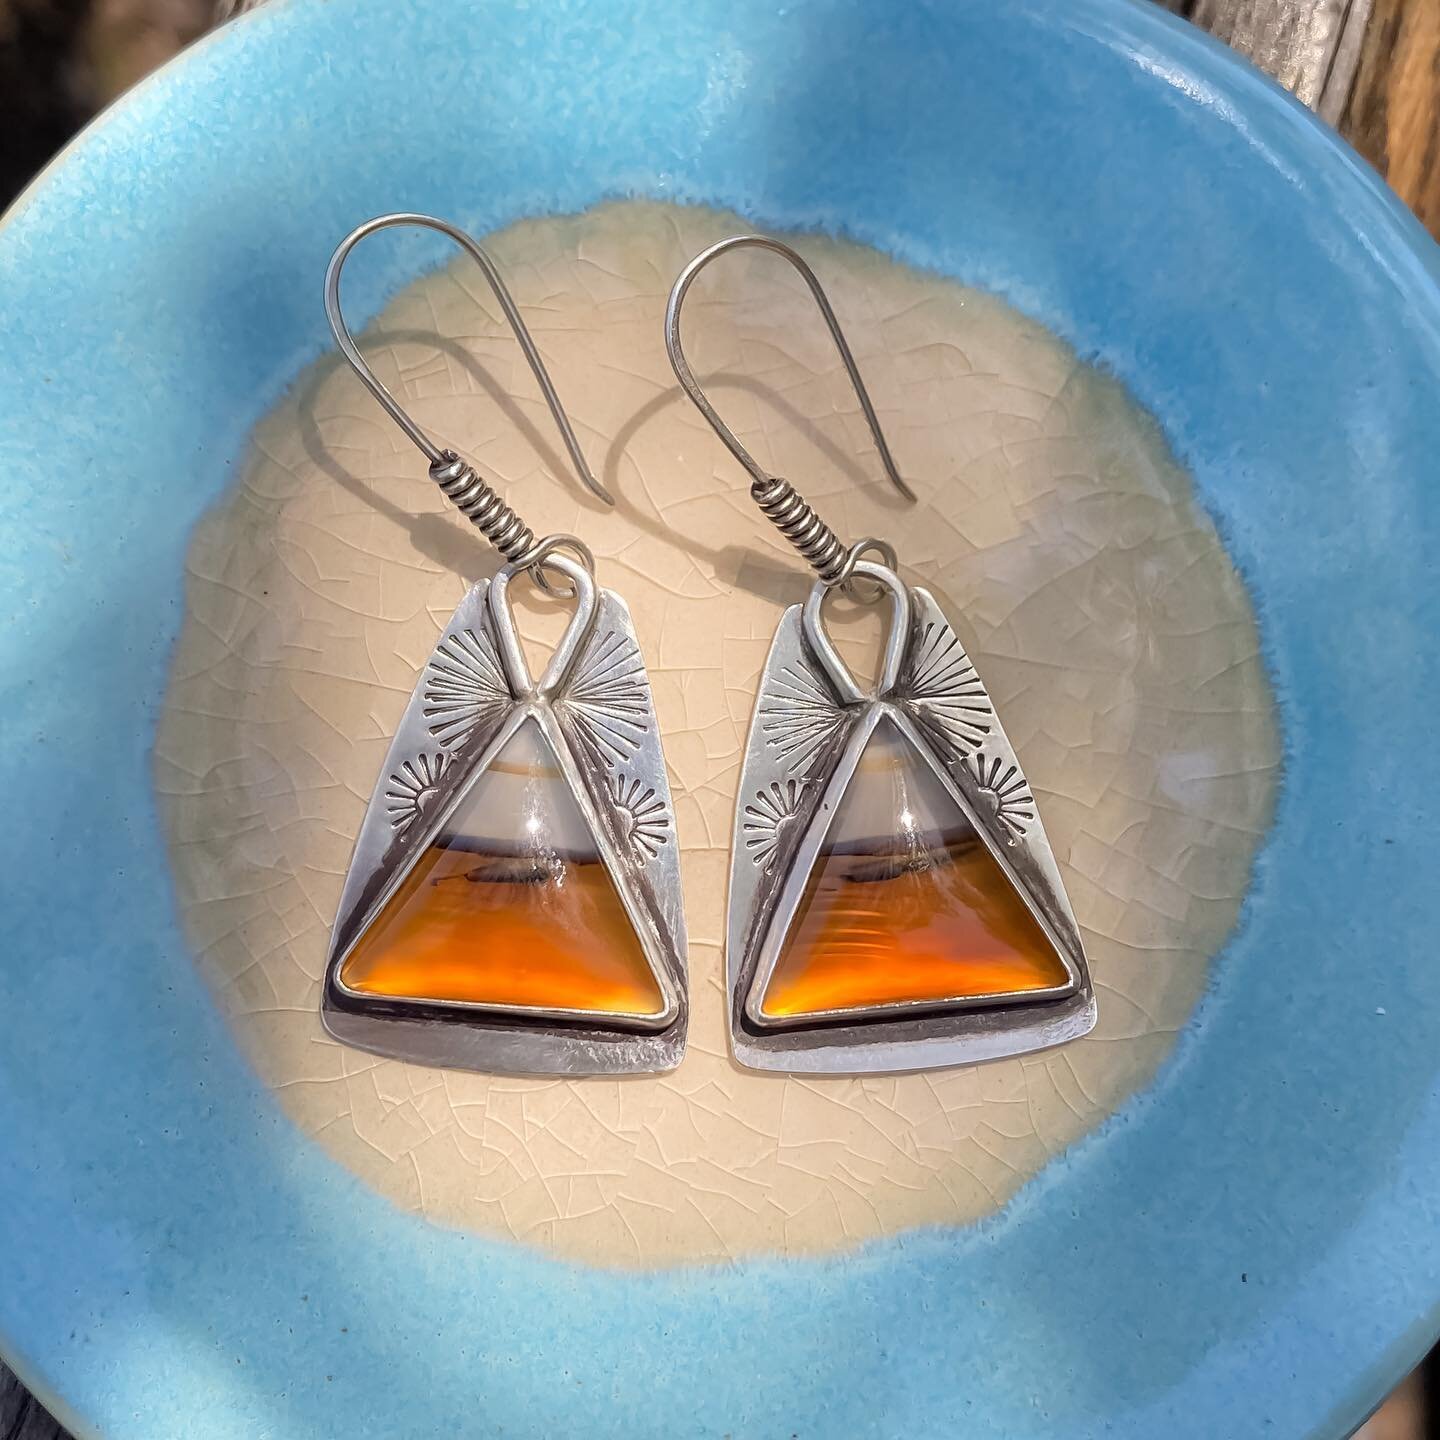 Montana agate is always a favorite for me. Love, love warm earthy browns and the beautiful translucence of the stones. #ghostdogjewelry #montanaagate #silversmiths #artisanearrings